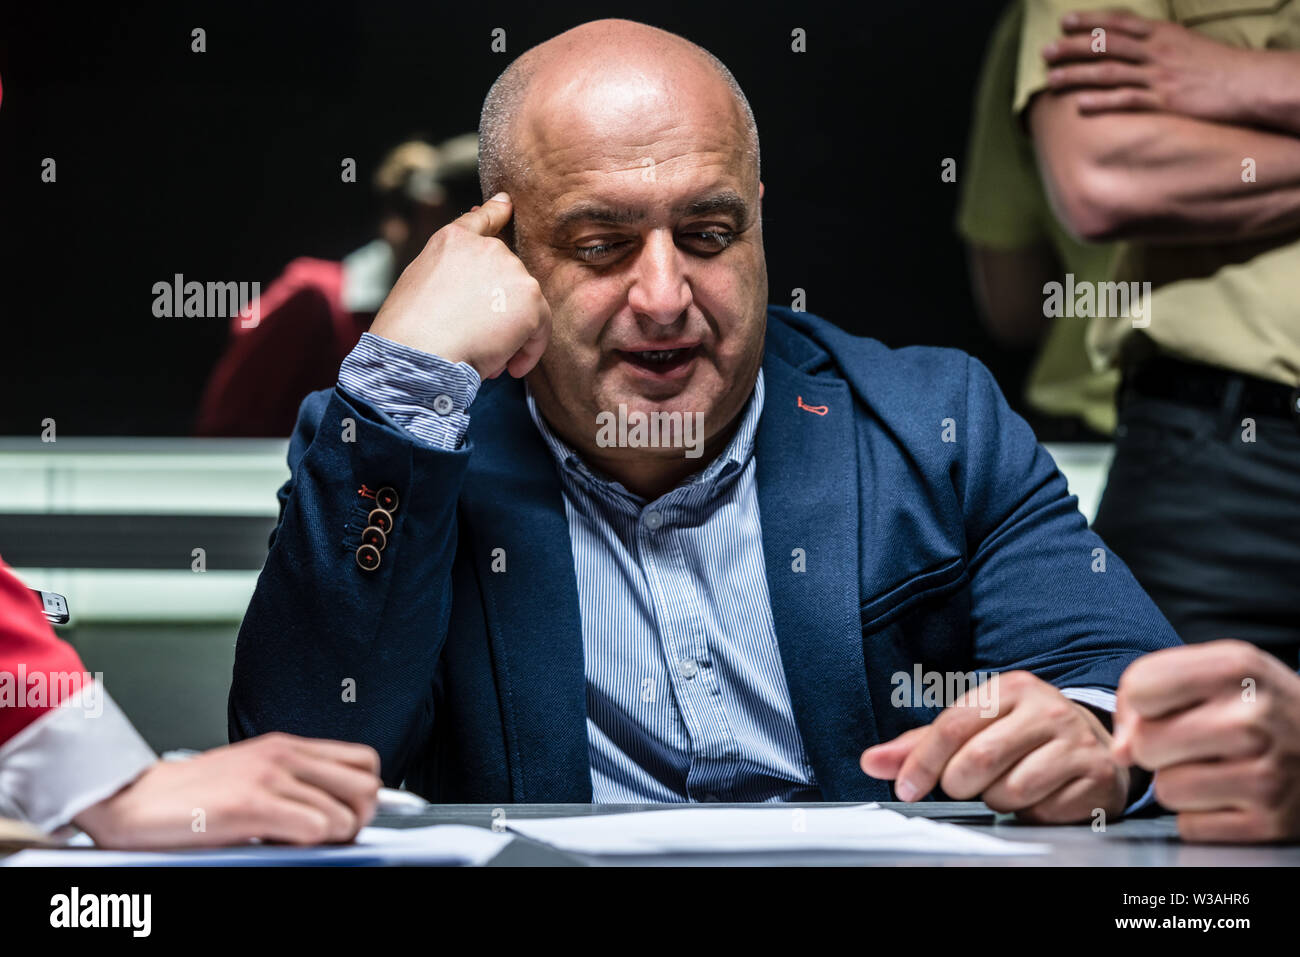 Man answering the questions of the prosecutor during an official interrogation Stock Photo